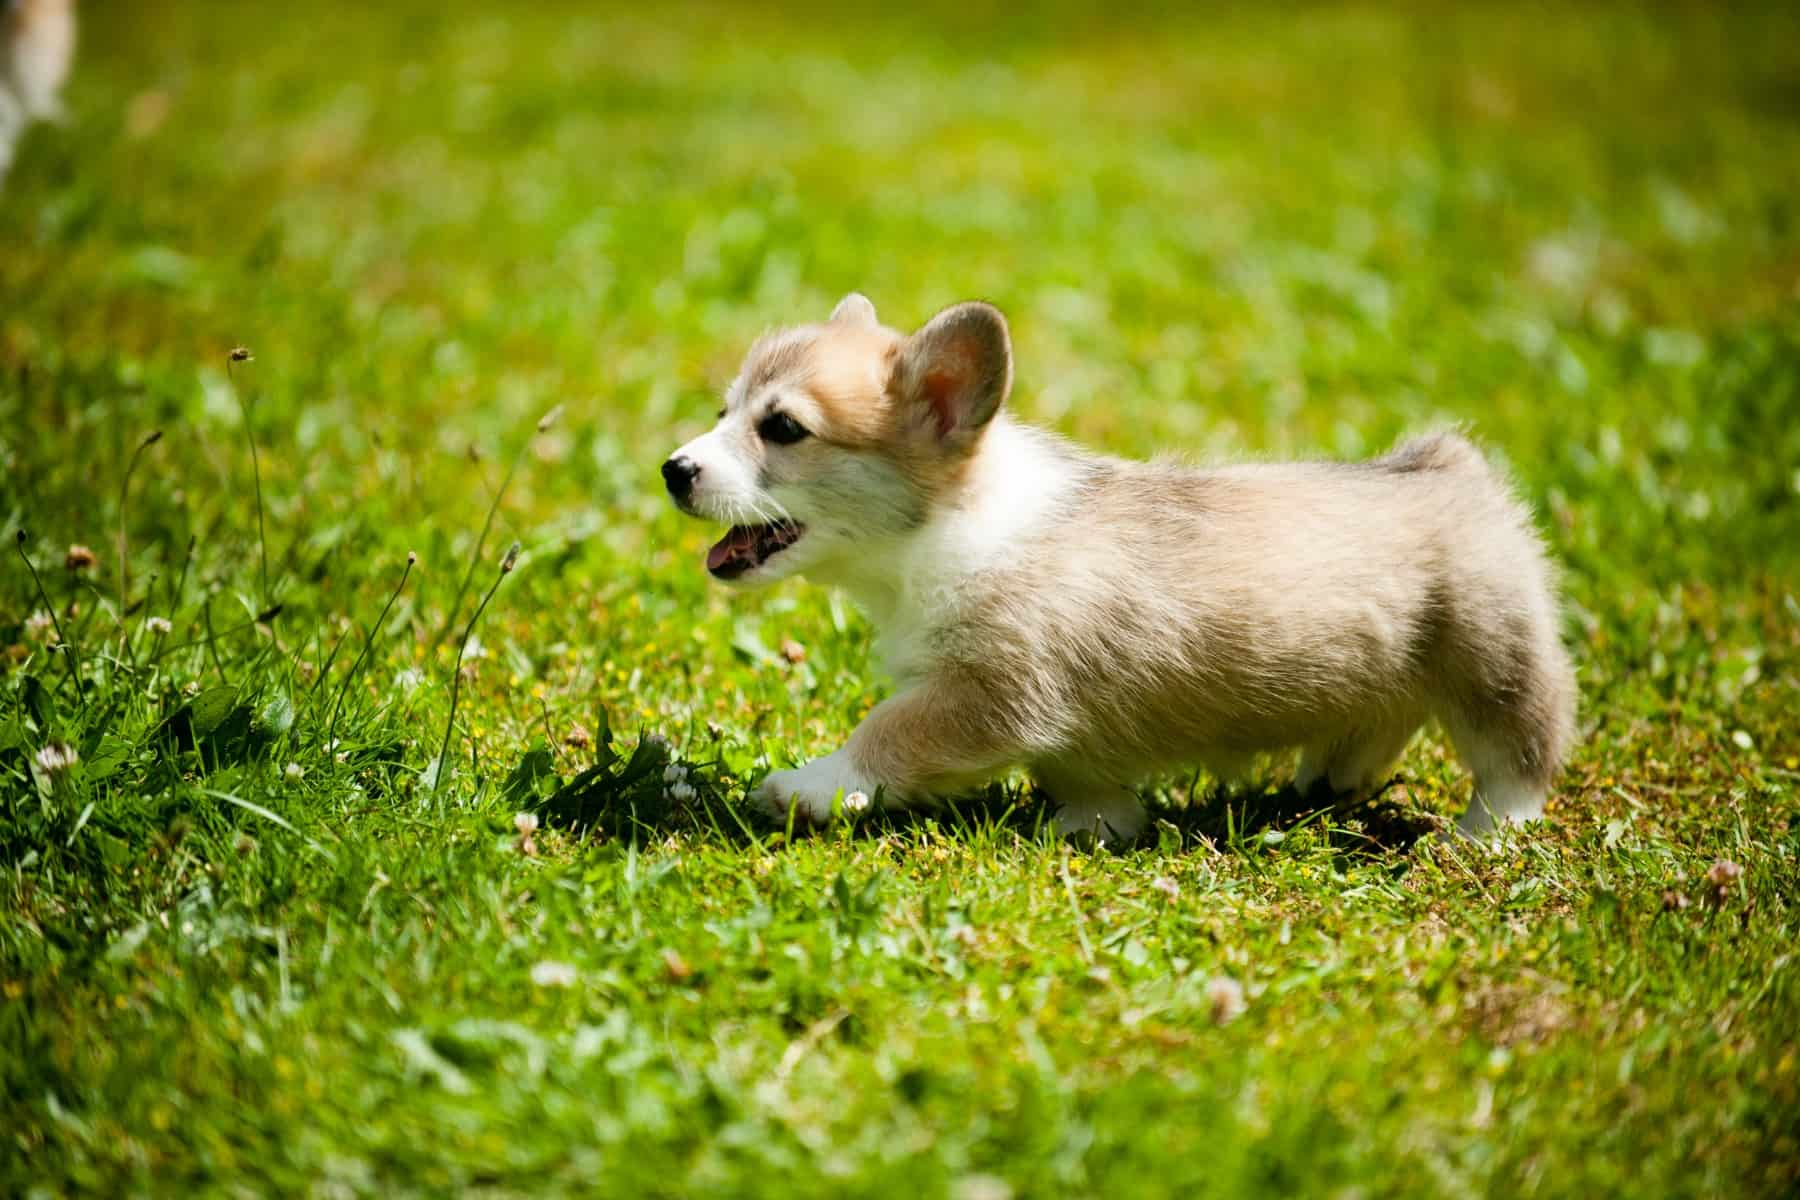 This corgi puppy outside in the grass needs to calm down and relax. It is very energetic and running around.